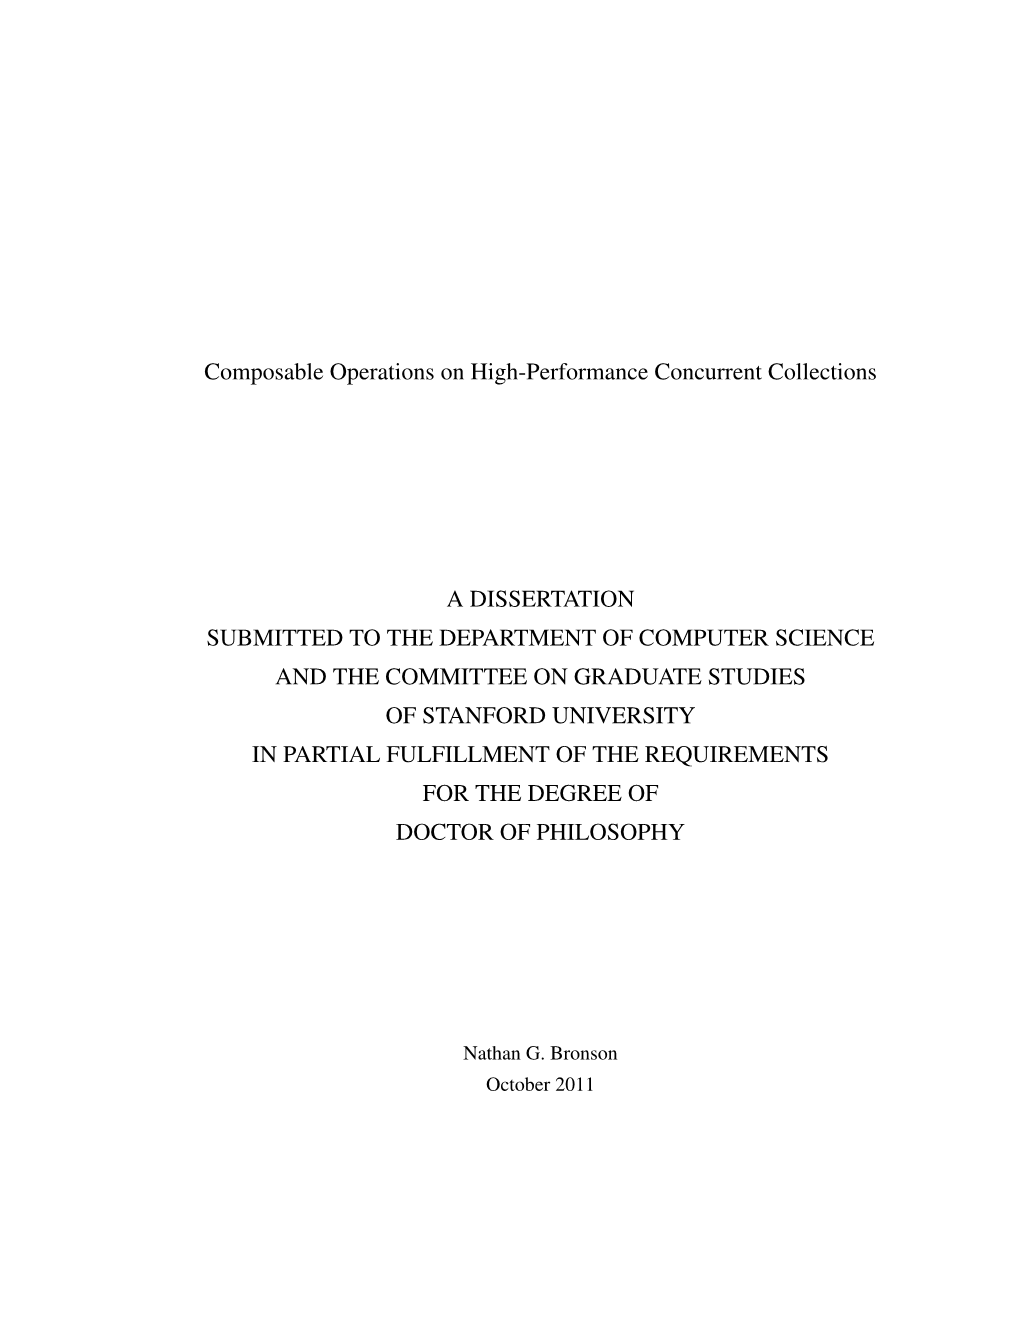 Composable Operations on High-Performance Concurrent Collections